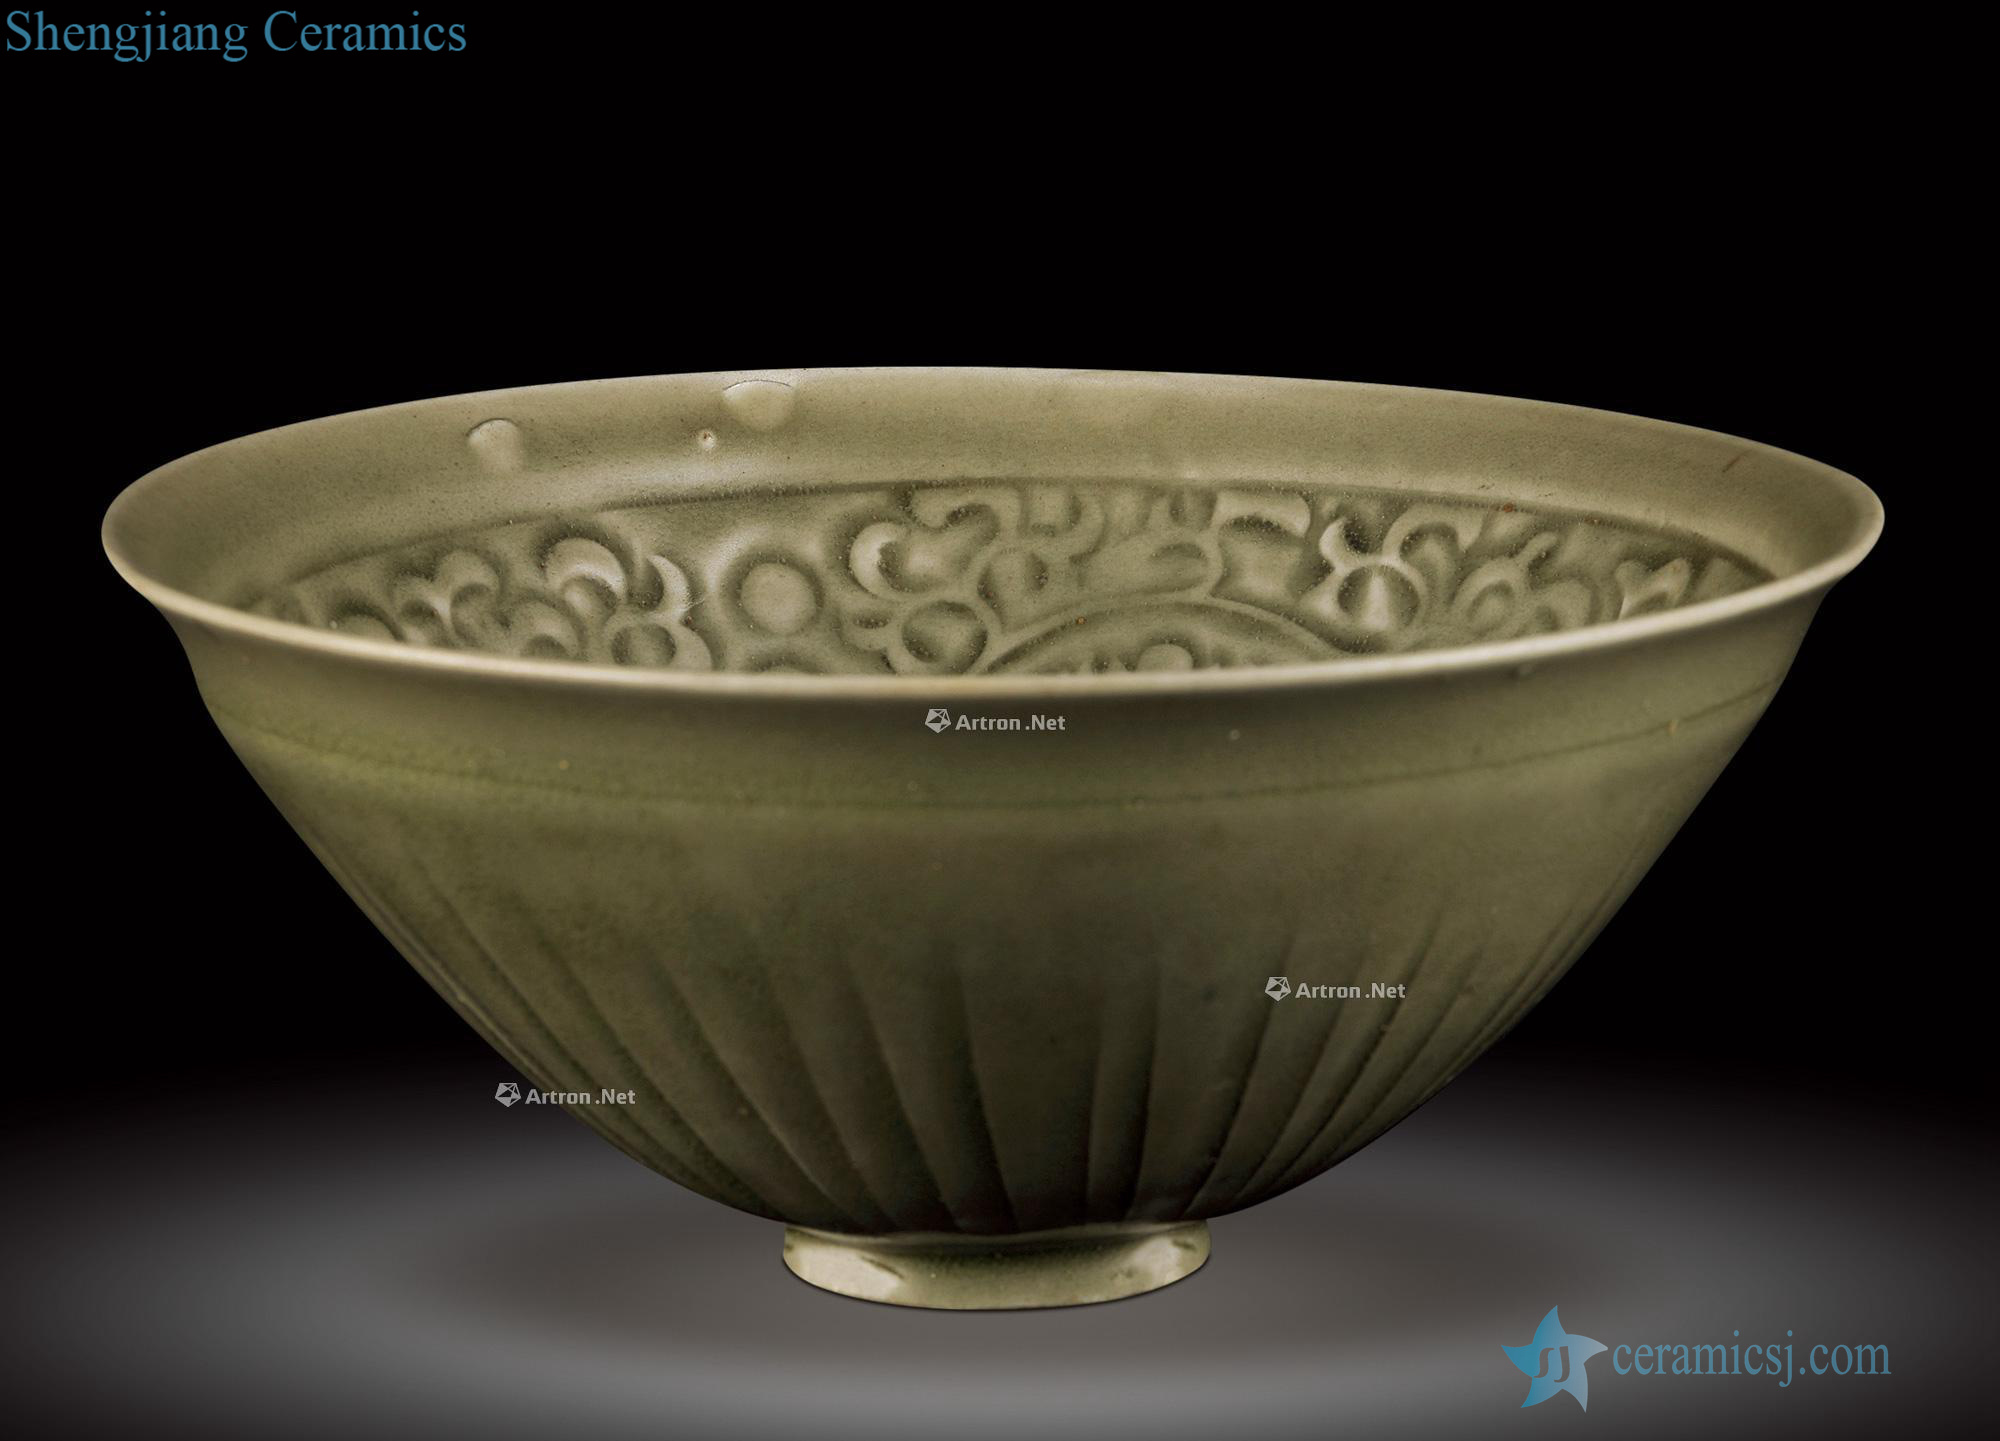 The song dynasty Yao state green glazed carved flowers green-splashed bowls